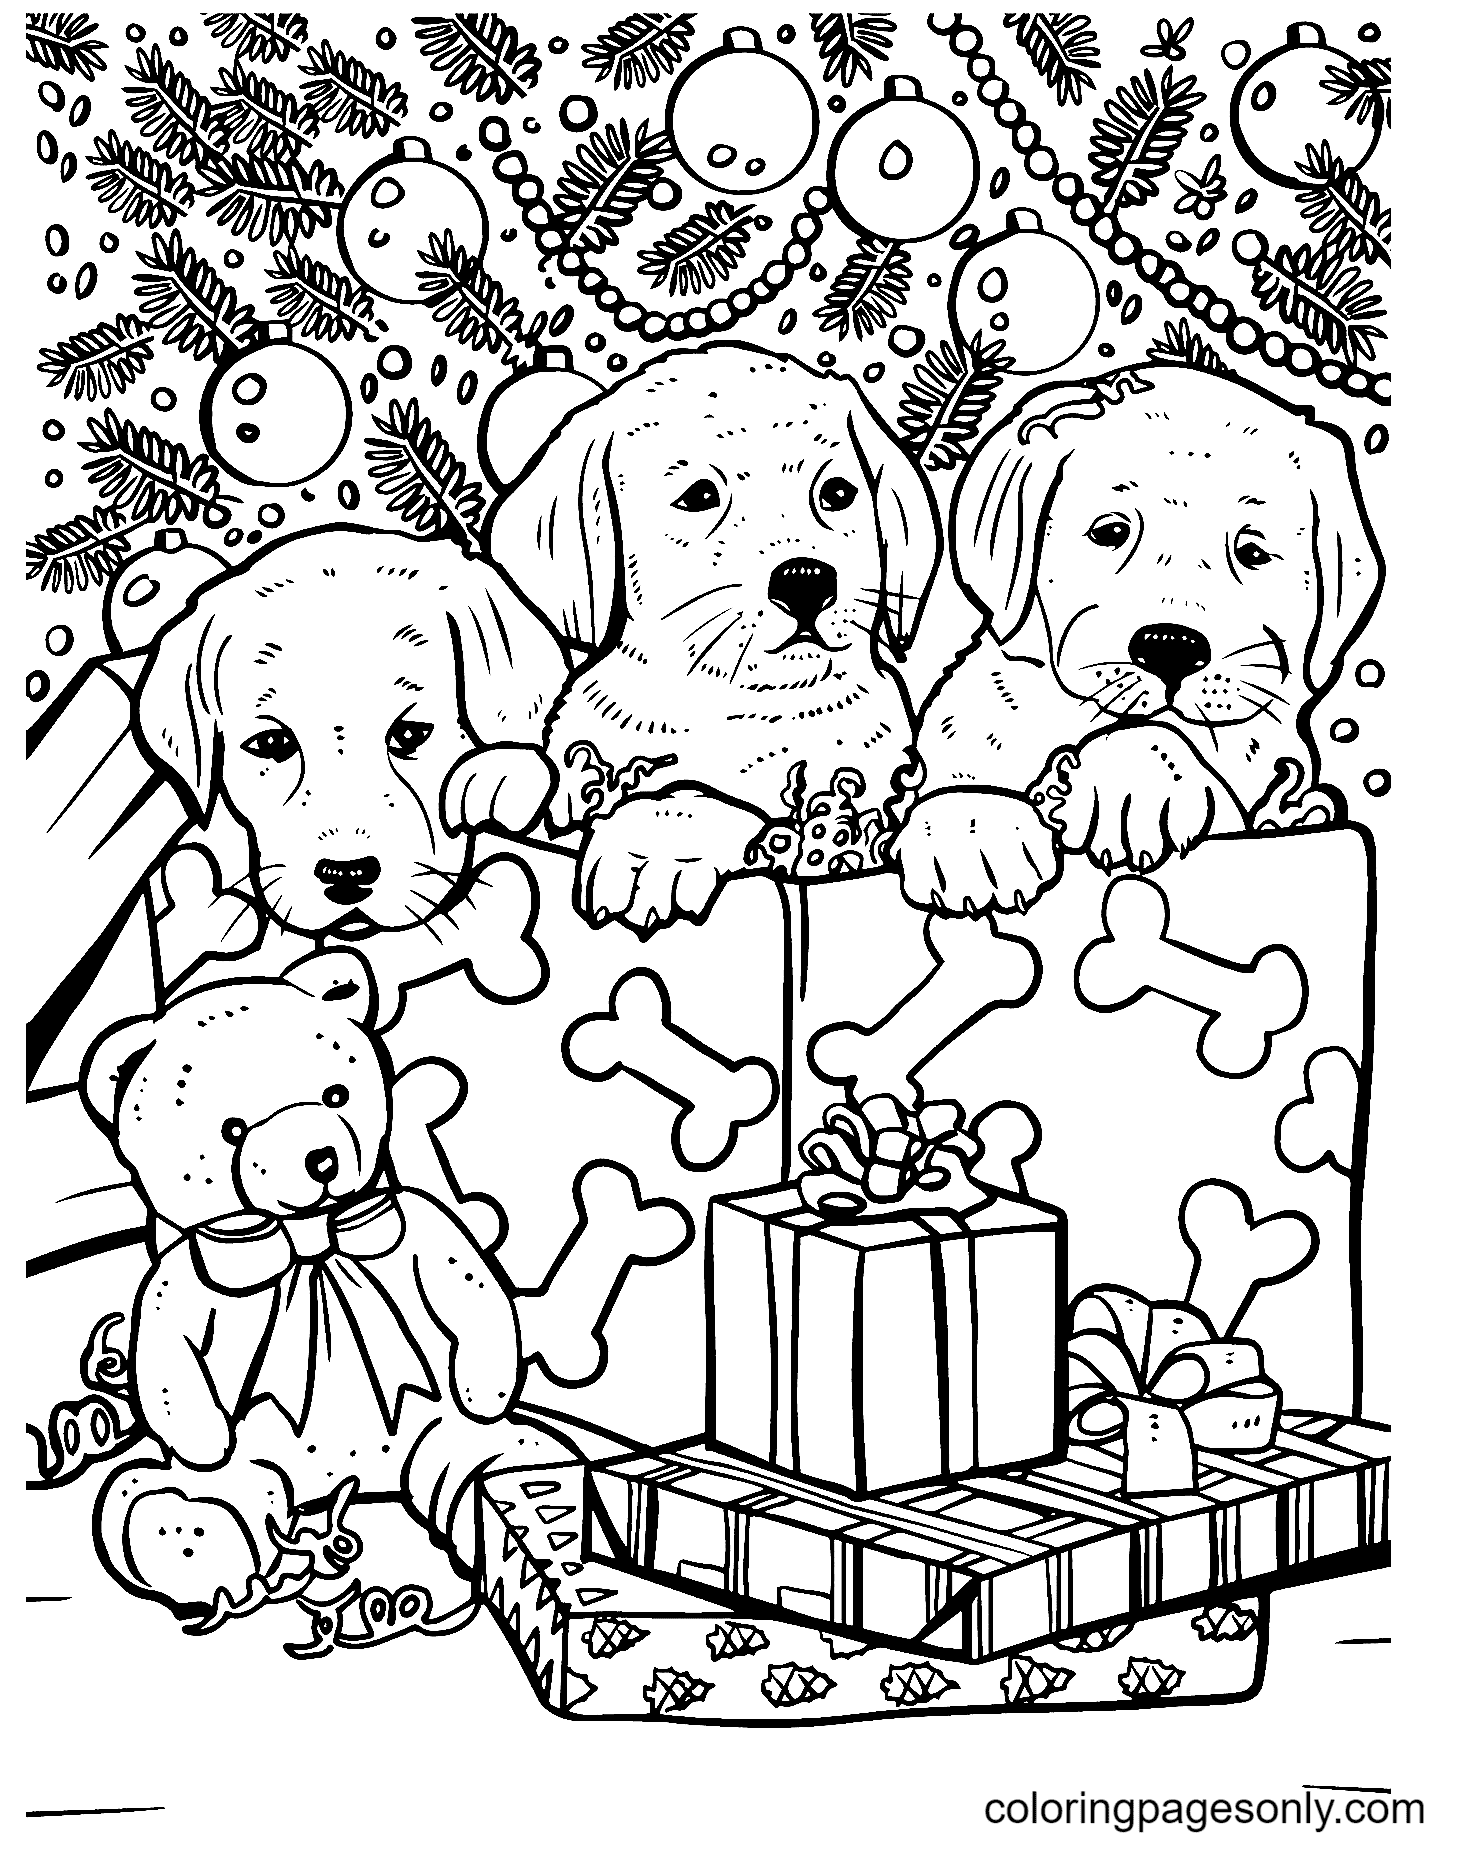 Cute Christmas Puppy Coloring Page